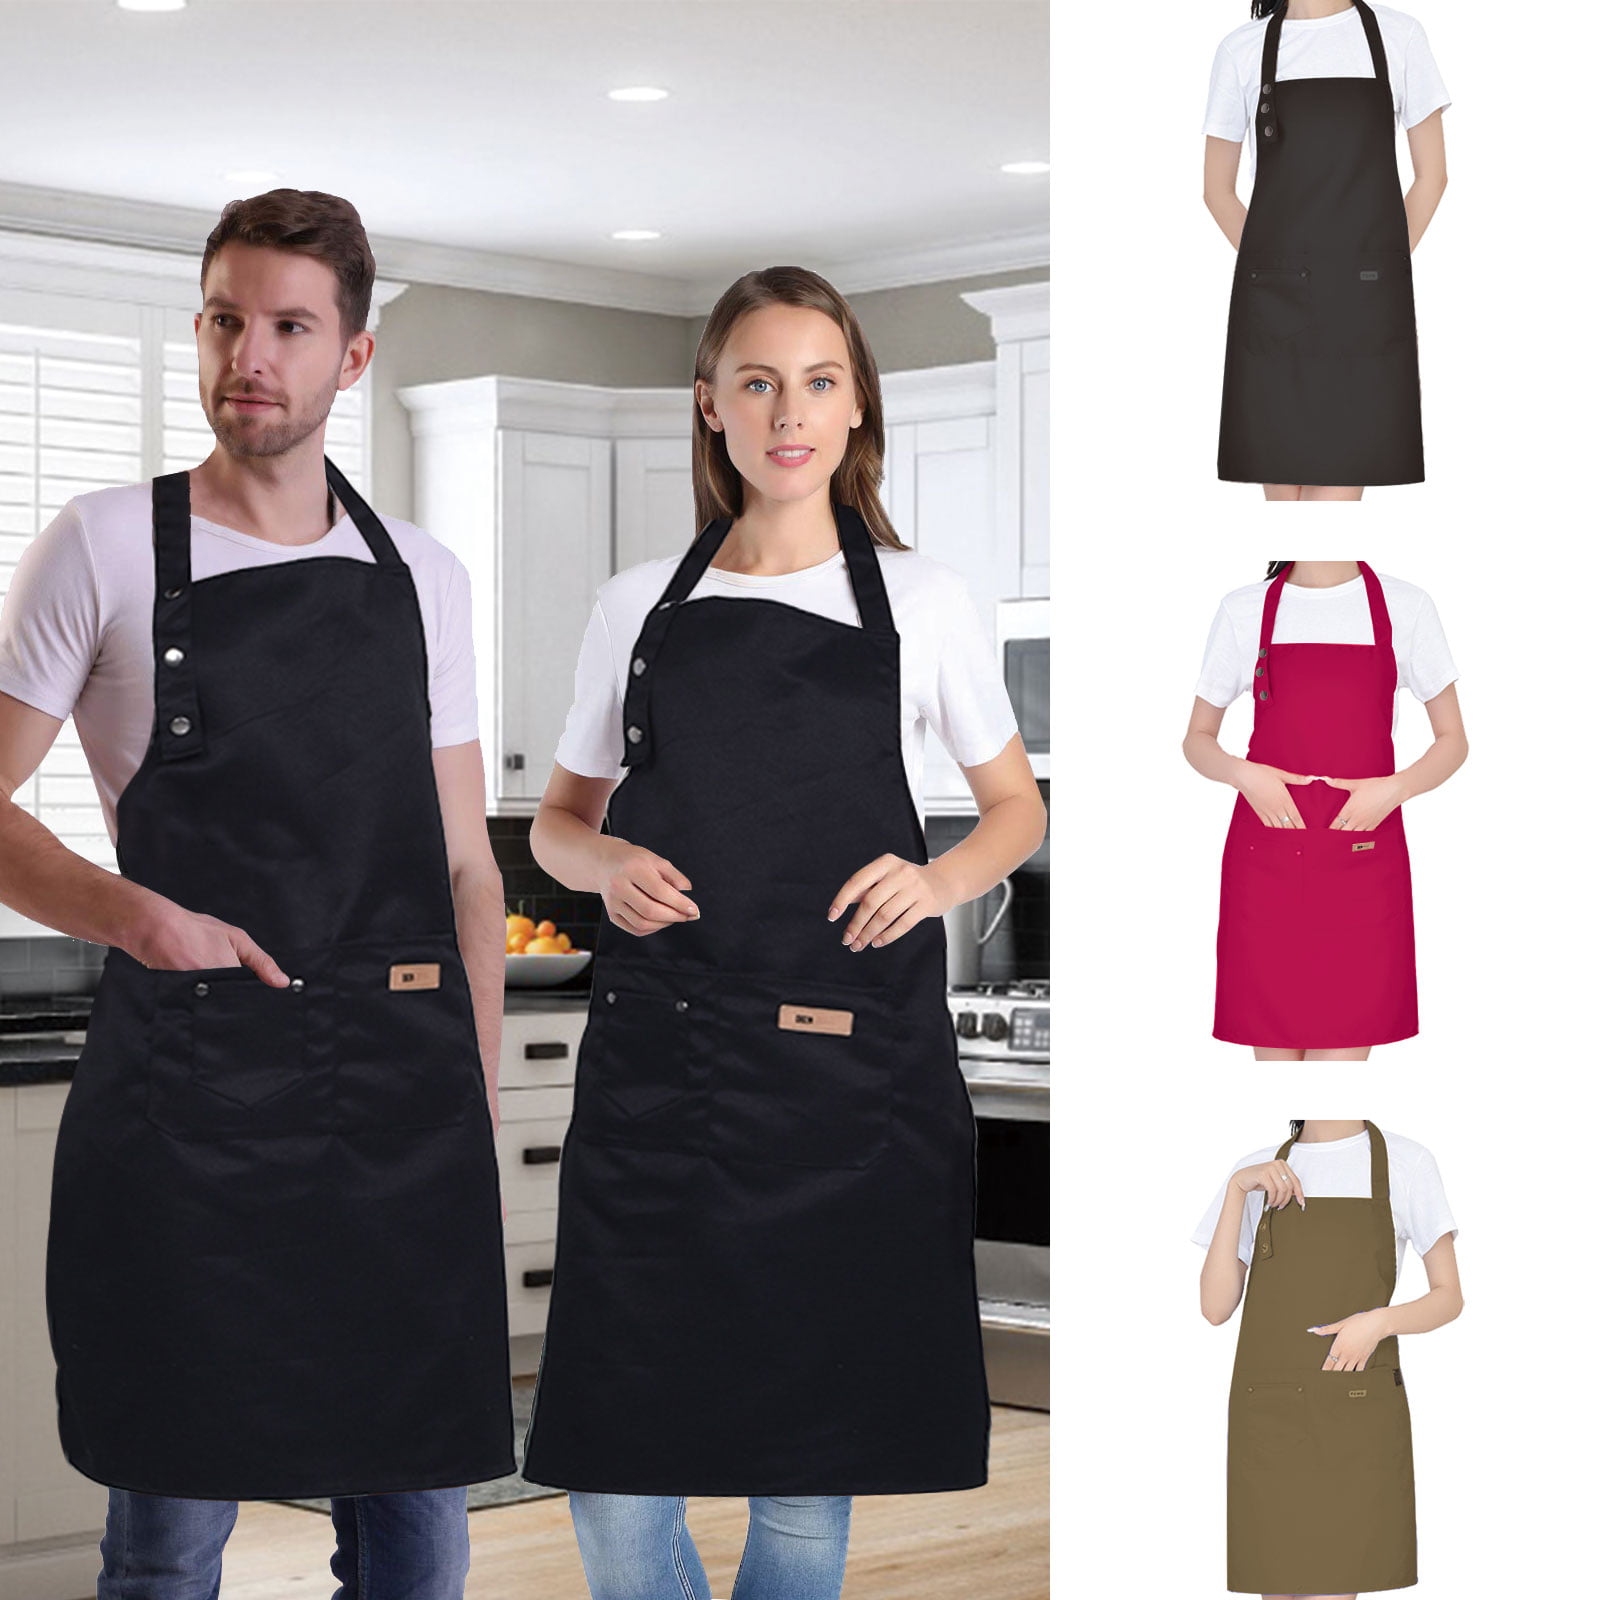 Crafts Grilling Cleaning Gardening One-of-a-Kind Sturdy Floral Canvas Apron for Cooking